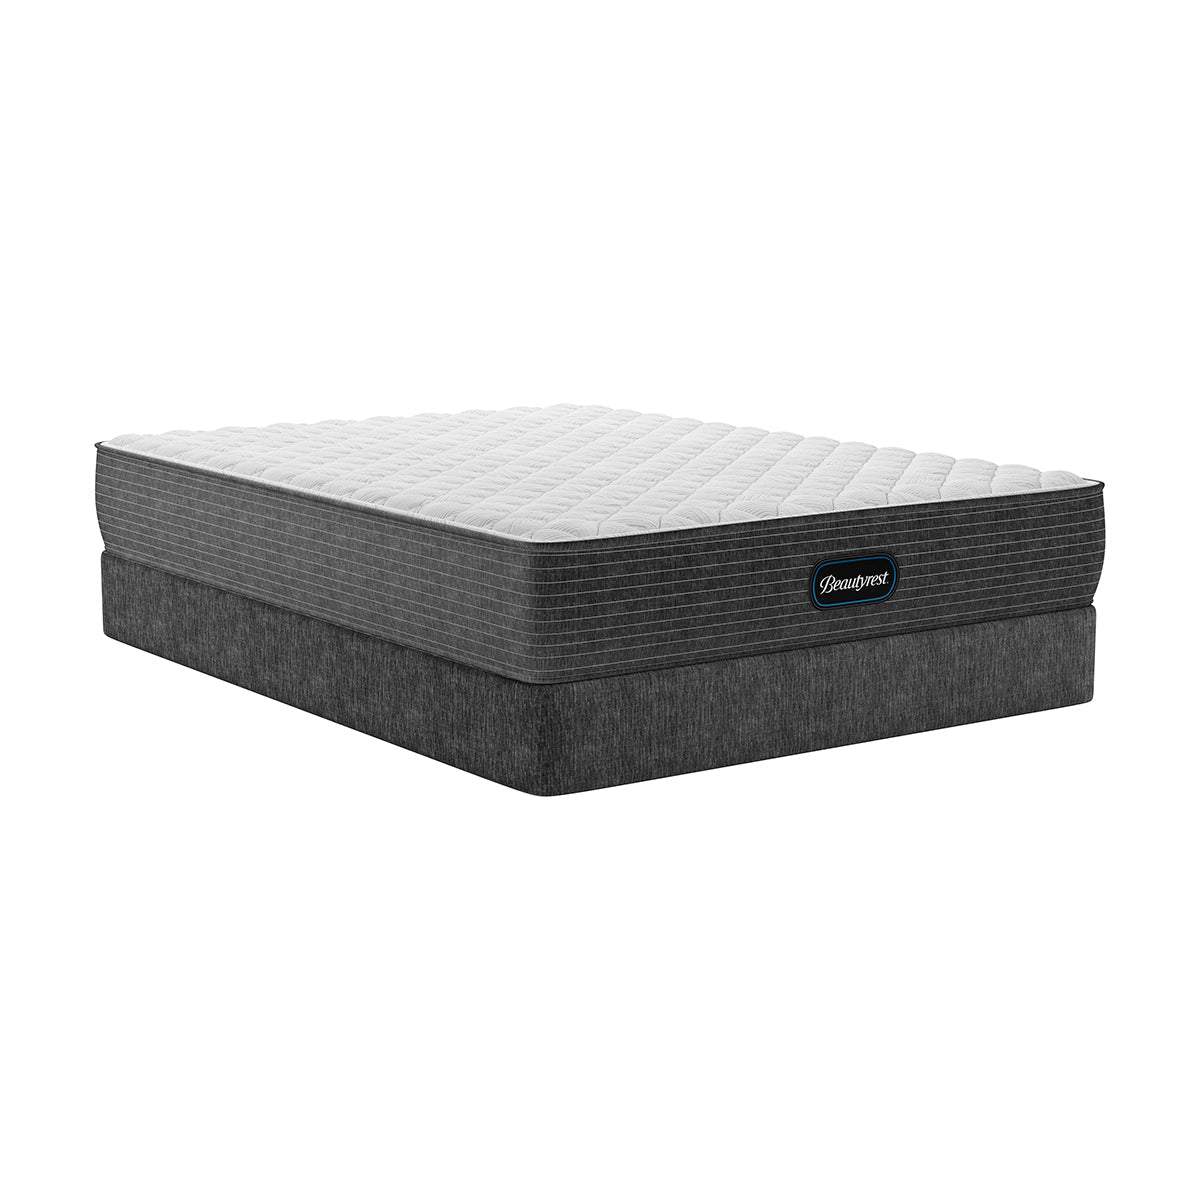 Beautyrest Elements Redford Firm Mattress On Box Spring Side View